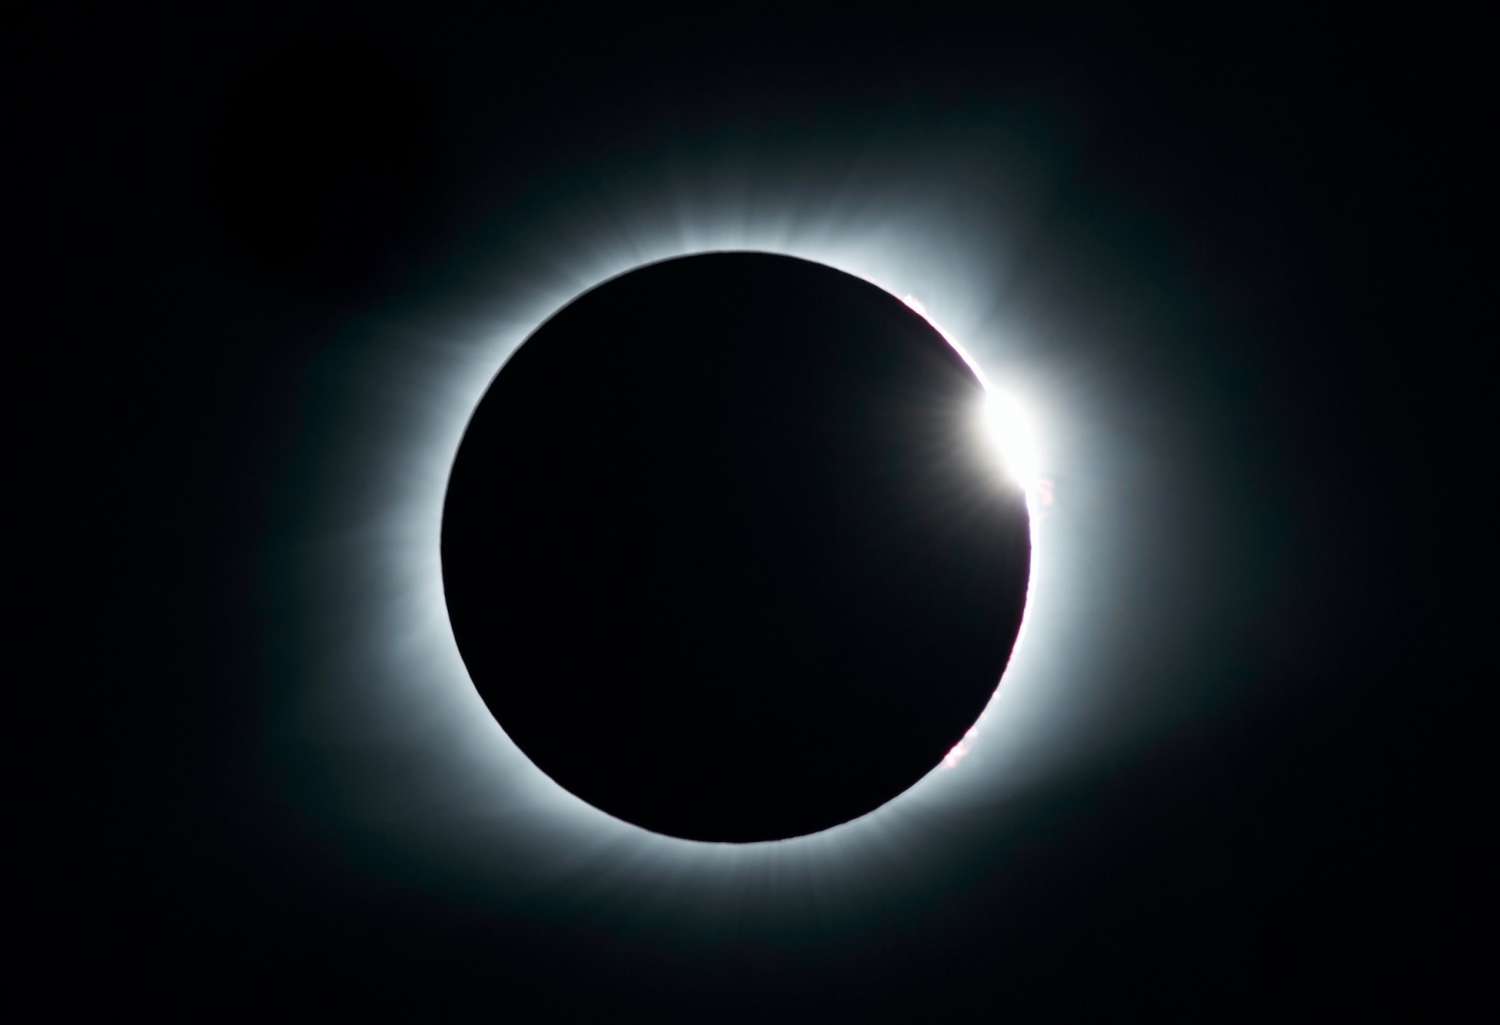 The moon passes in front of the sun for a solar eclipse